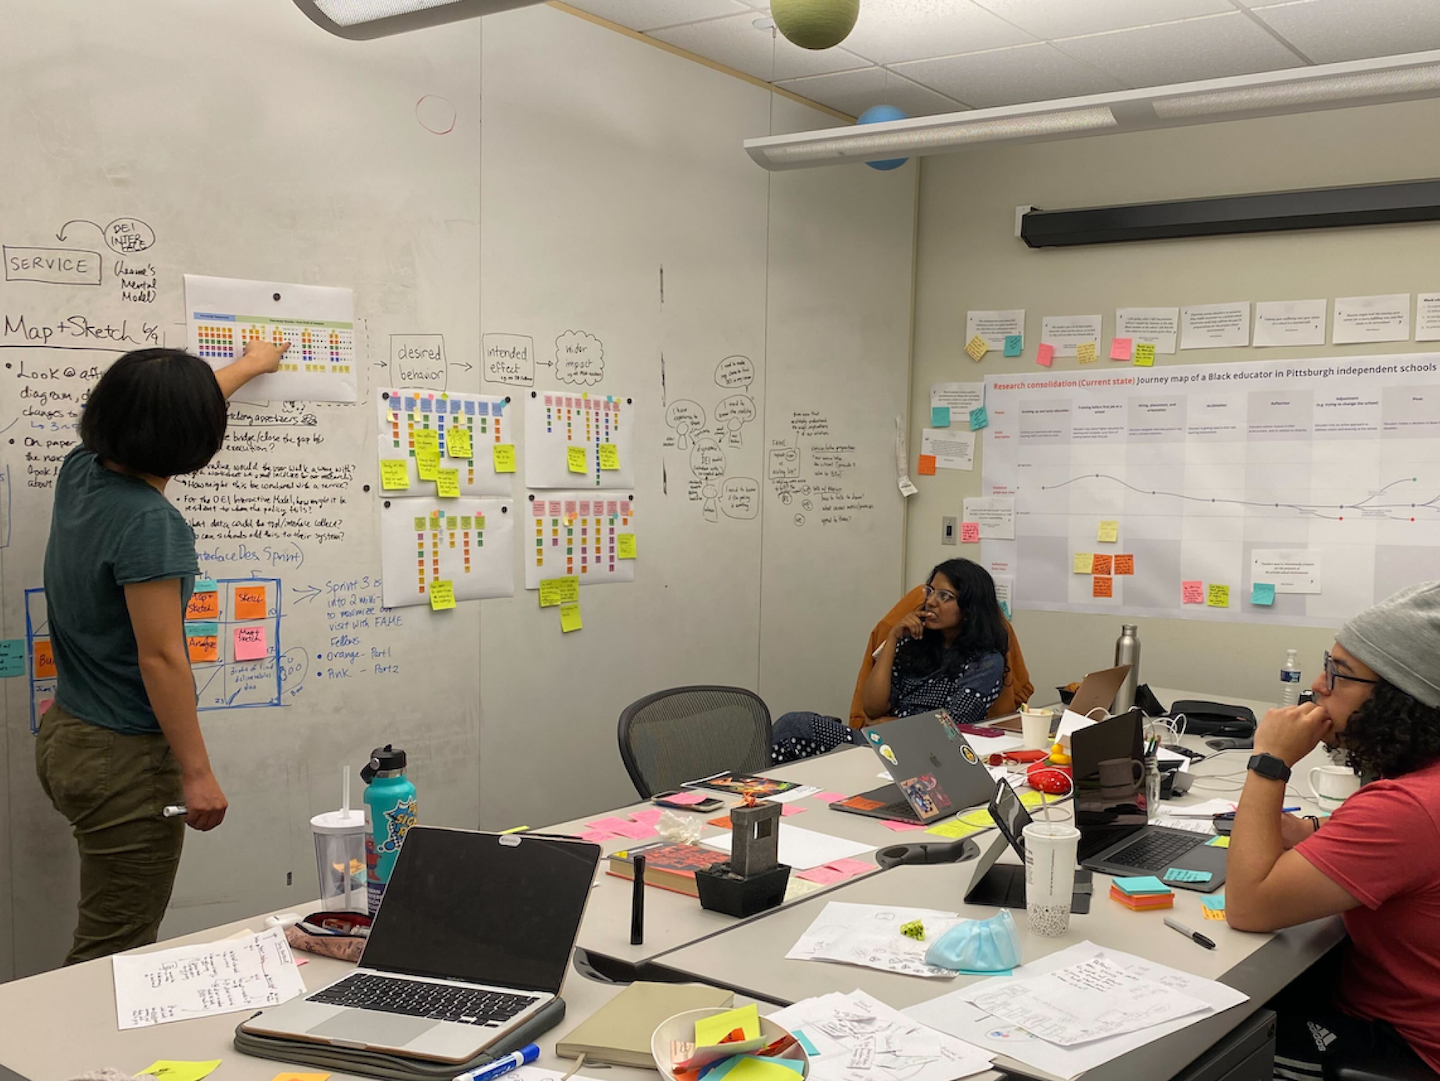 Martina points at a printout on a board filled with design notes, while her team listens attentively